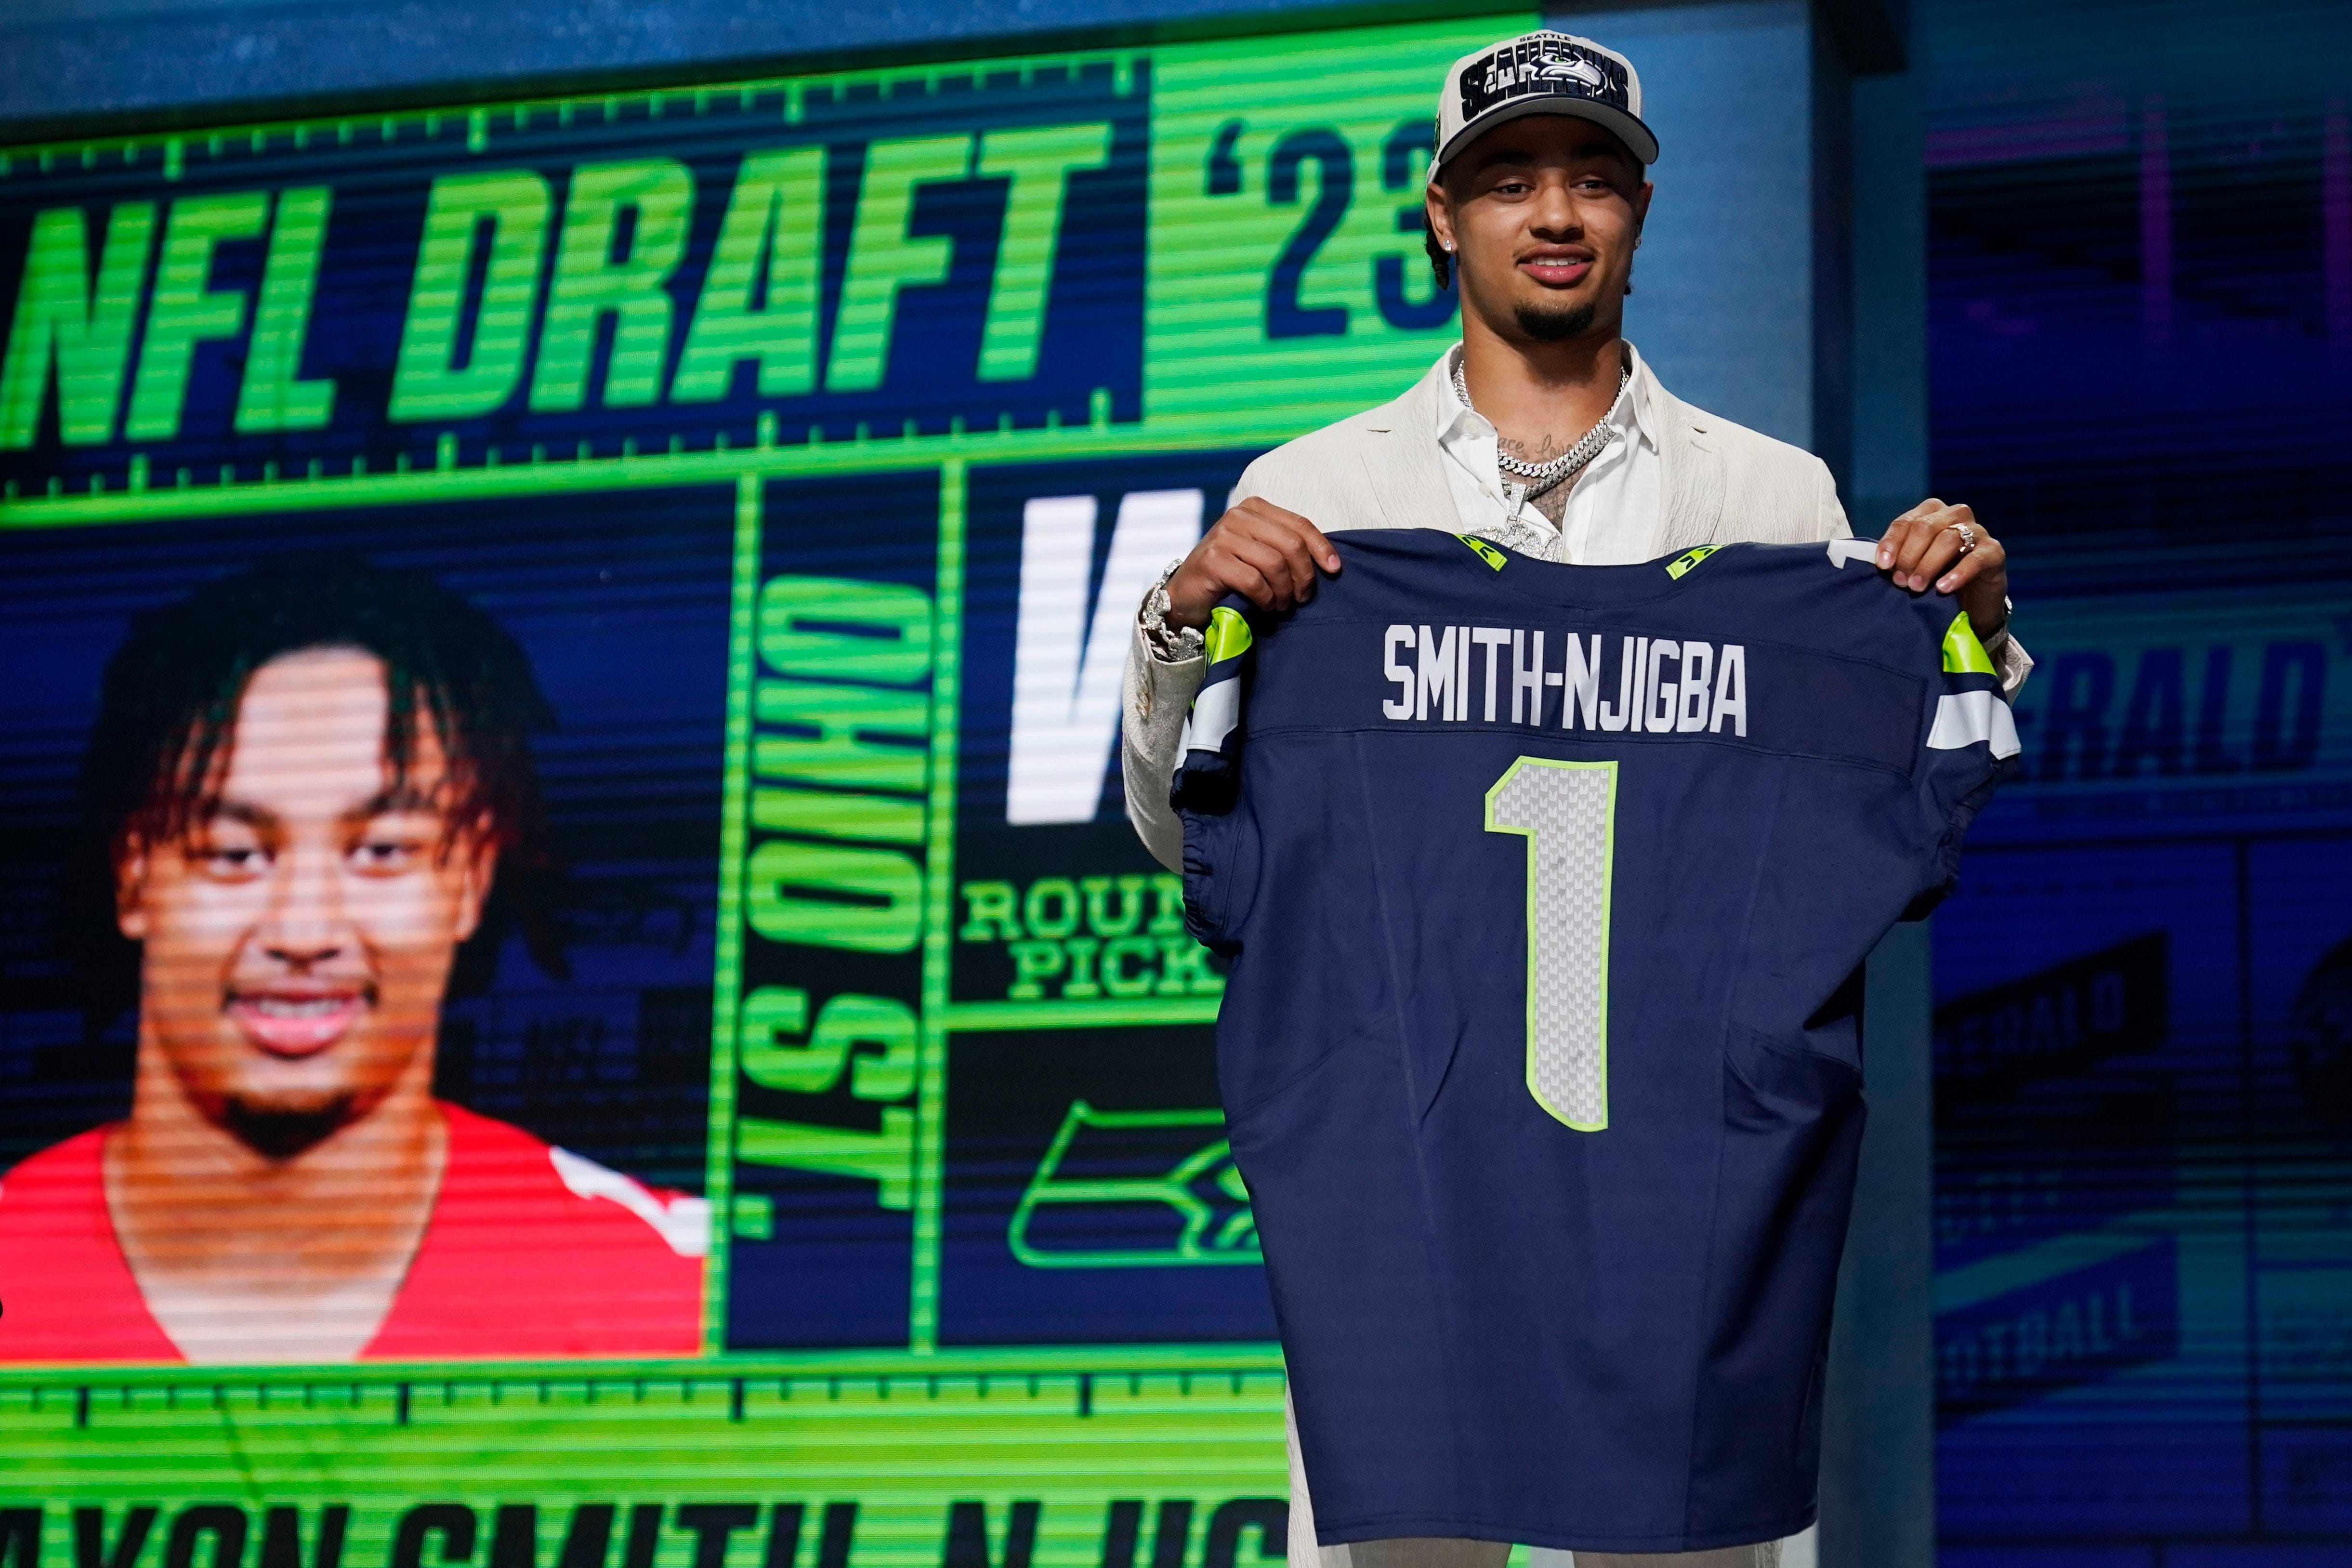 Jaxon Smith-Njigba's brother shares love after NFL draft: 'A blessing to be your brother'